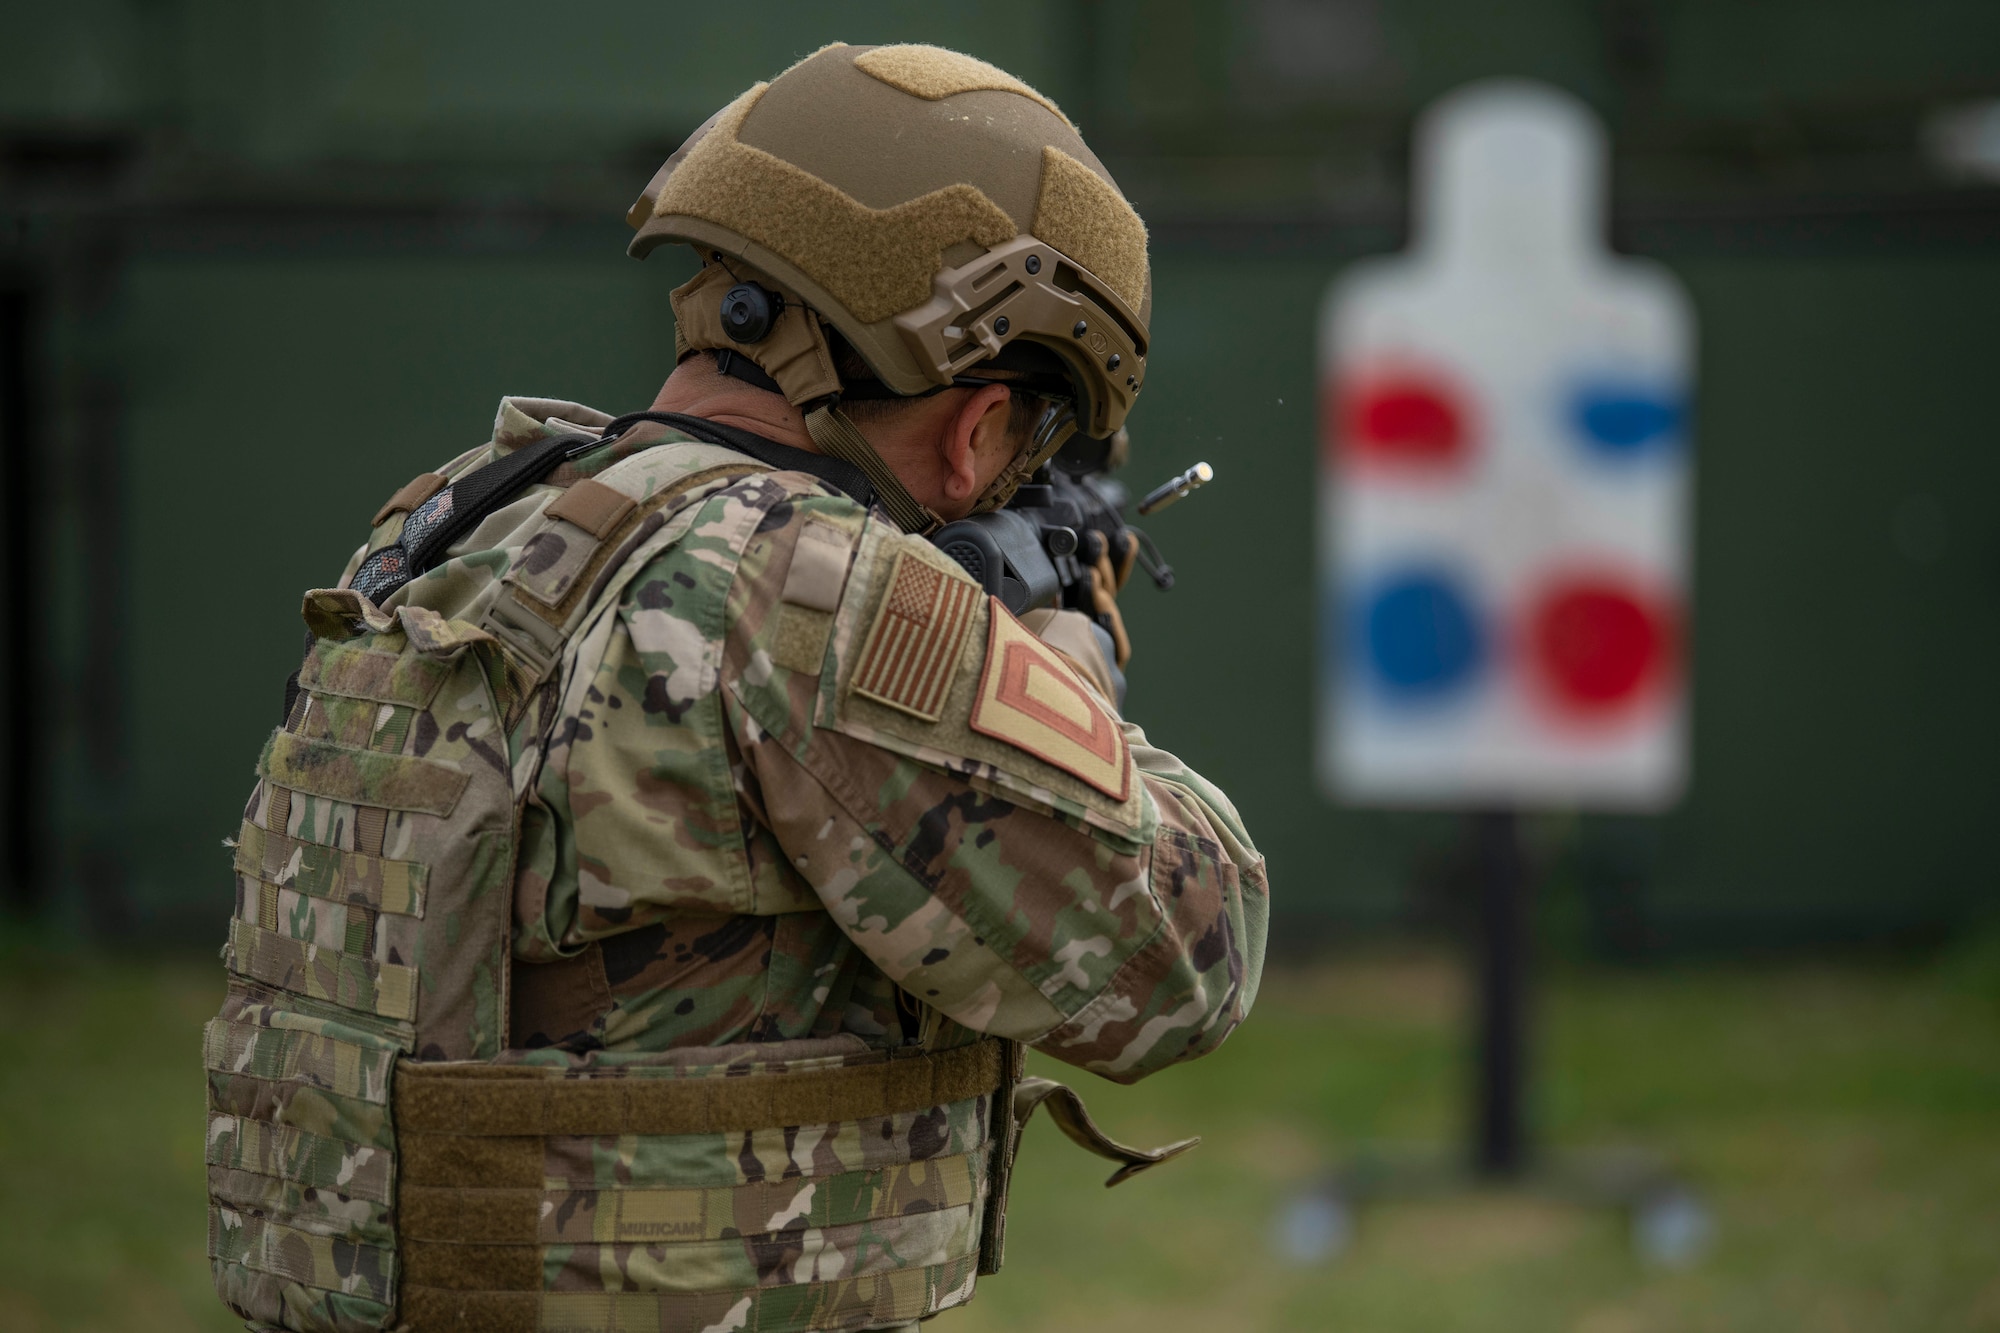 Col. Troy Pananon, 100th Air Refueling Wing commander, shoots an M4 Carbine during shoot, move and communicate training with Airmen from the 100th Security Forces Squadron at RAF Mildenhall, England, Aug. 30, 2019. Airmen from 100th SFS are RAF Mildenhall’s first line of defense against any adversary and are highly trained in law enforcement and they are combat arms specialist prepared to protect and serve their fellow Airmen around-the-clock. They have similar responsibilities as civilian officers, including responding to emergencies, directing traffic and investigating crimes on base. (U.S. Air Force photo by Senior Airman Luke Milano)